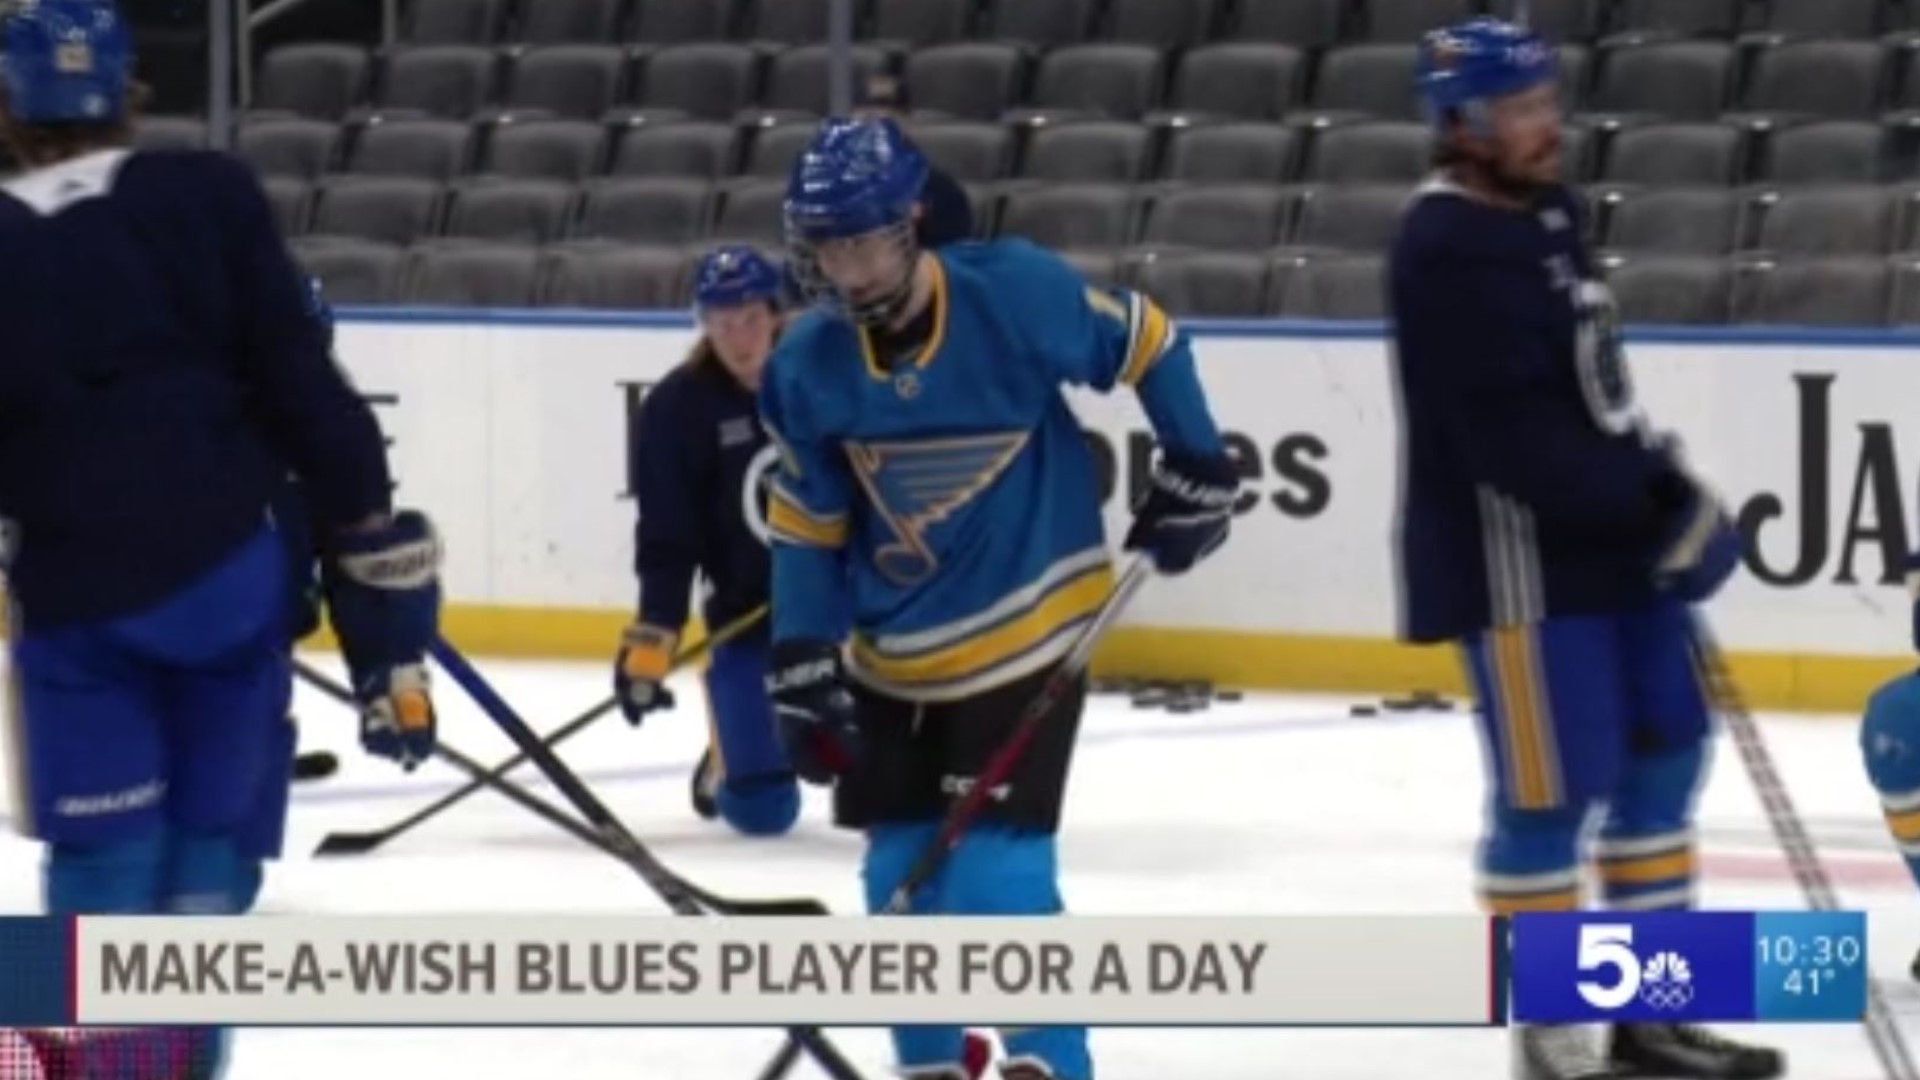 Thanks to Make-A-Wish the St. Louis Blues signed 15-year-old Ronan Moore to a one-day contract. Ronan got to skate side-by-side with his favorite players.